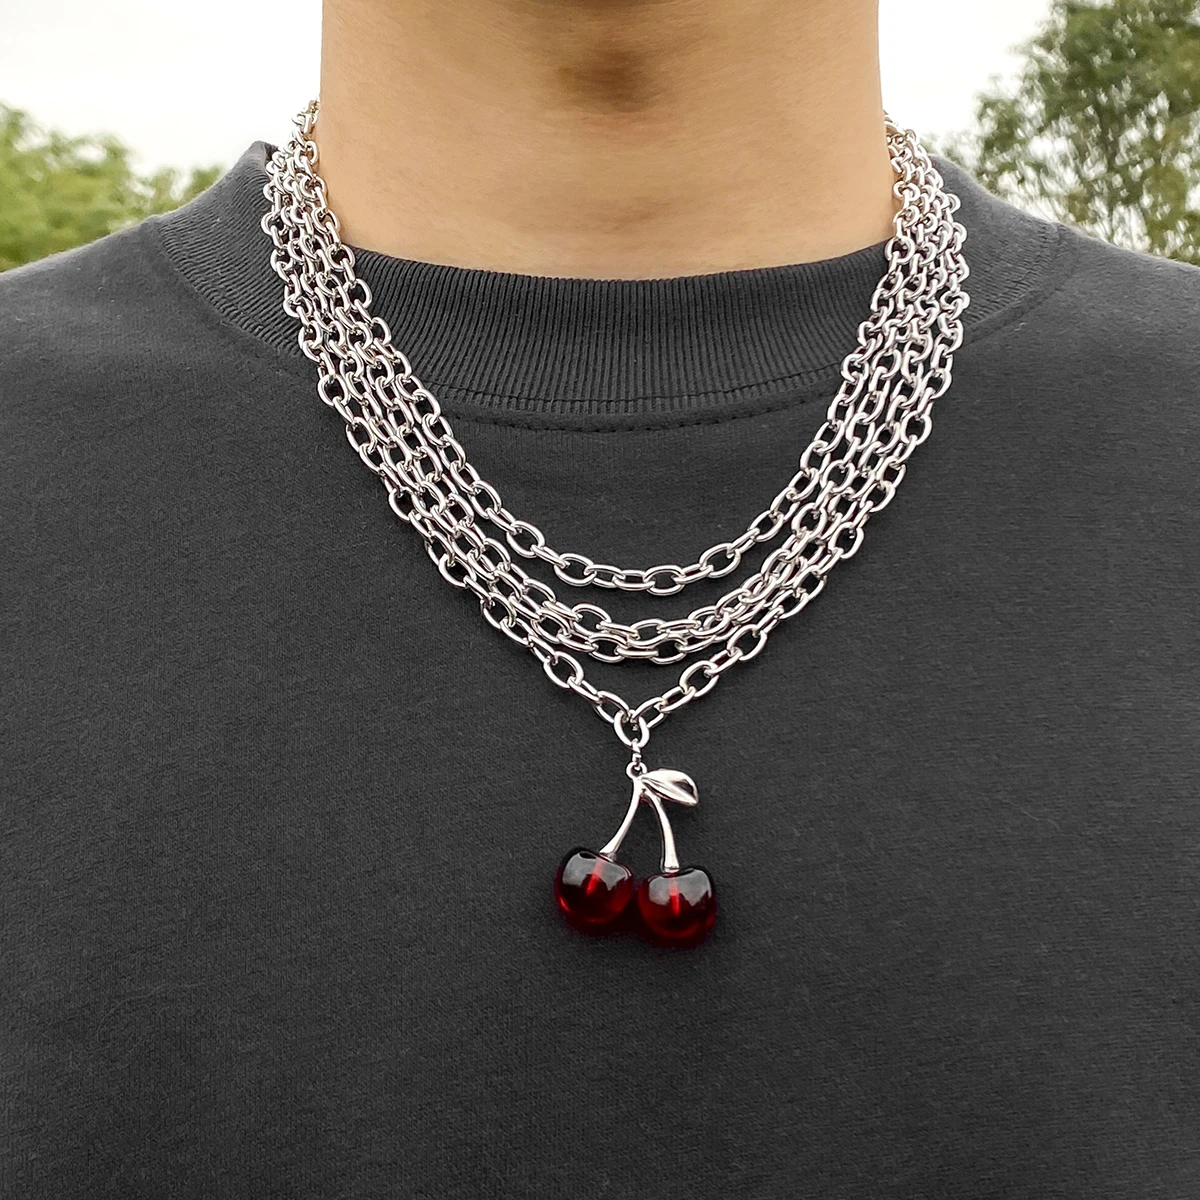 

KunJoe Punk Multi-layered Cuban Thick Chain Cherry Pendant Necklace for Men Women Gothic Silver Color Metal Clavicle Chain Gift